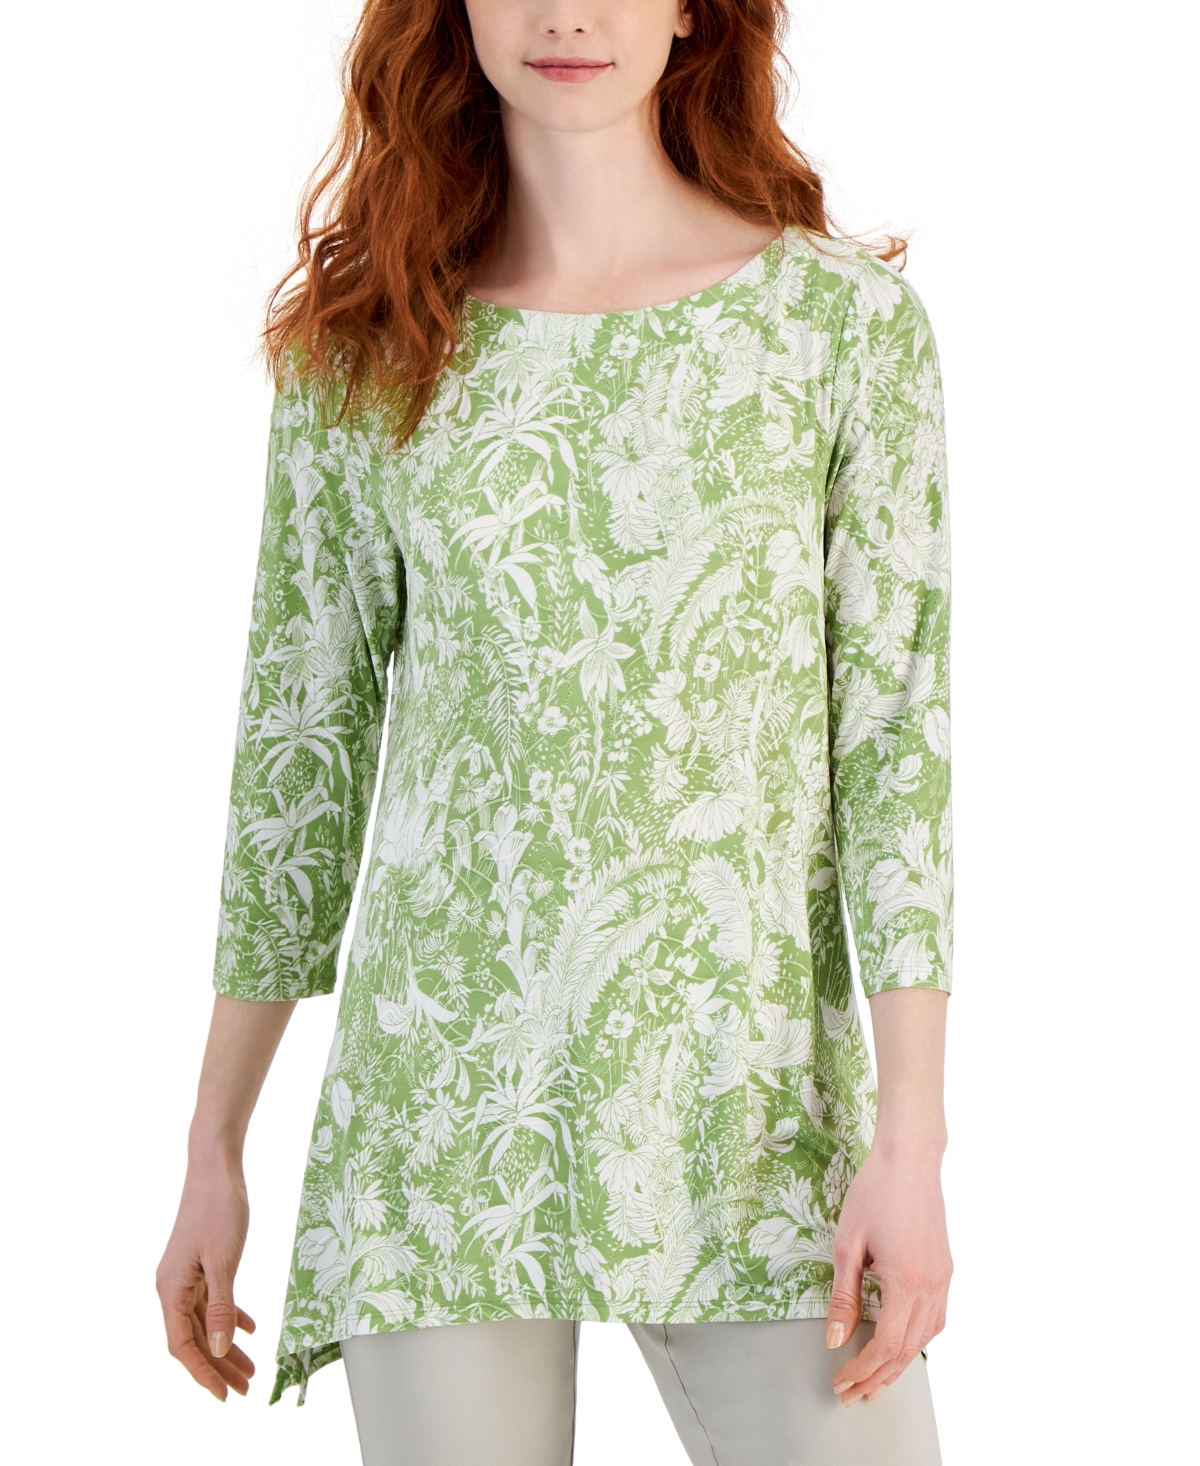 Women's Printed 3/4-Sleeve Swing Top, Created for Macy's - Neo Natural Combo